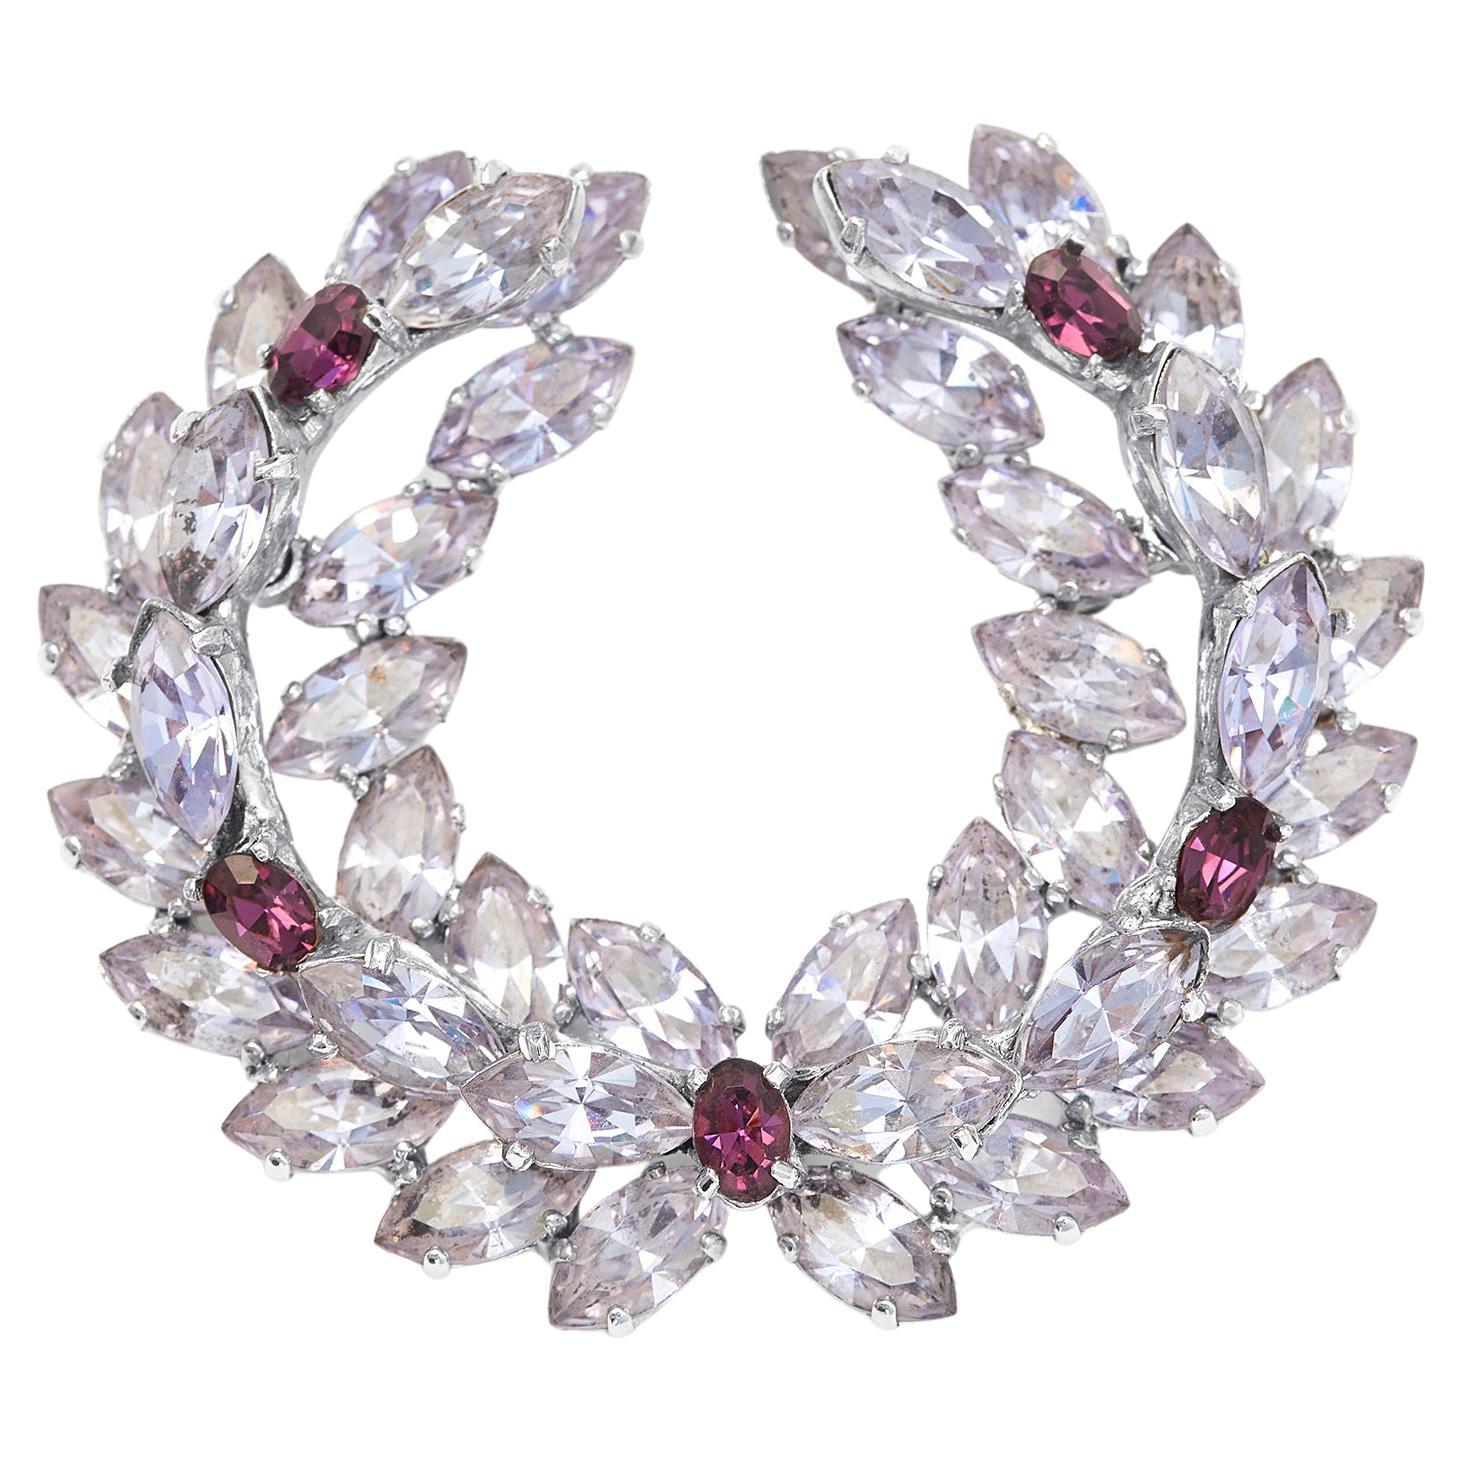 1950s Christian Dior Wreath Brooch and Earrings Set